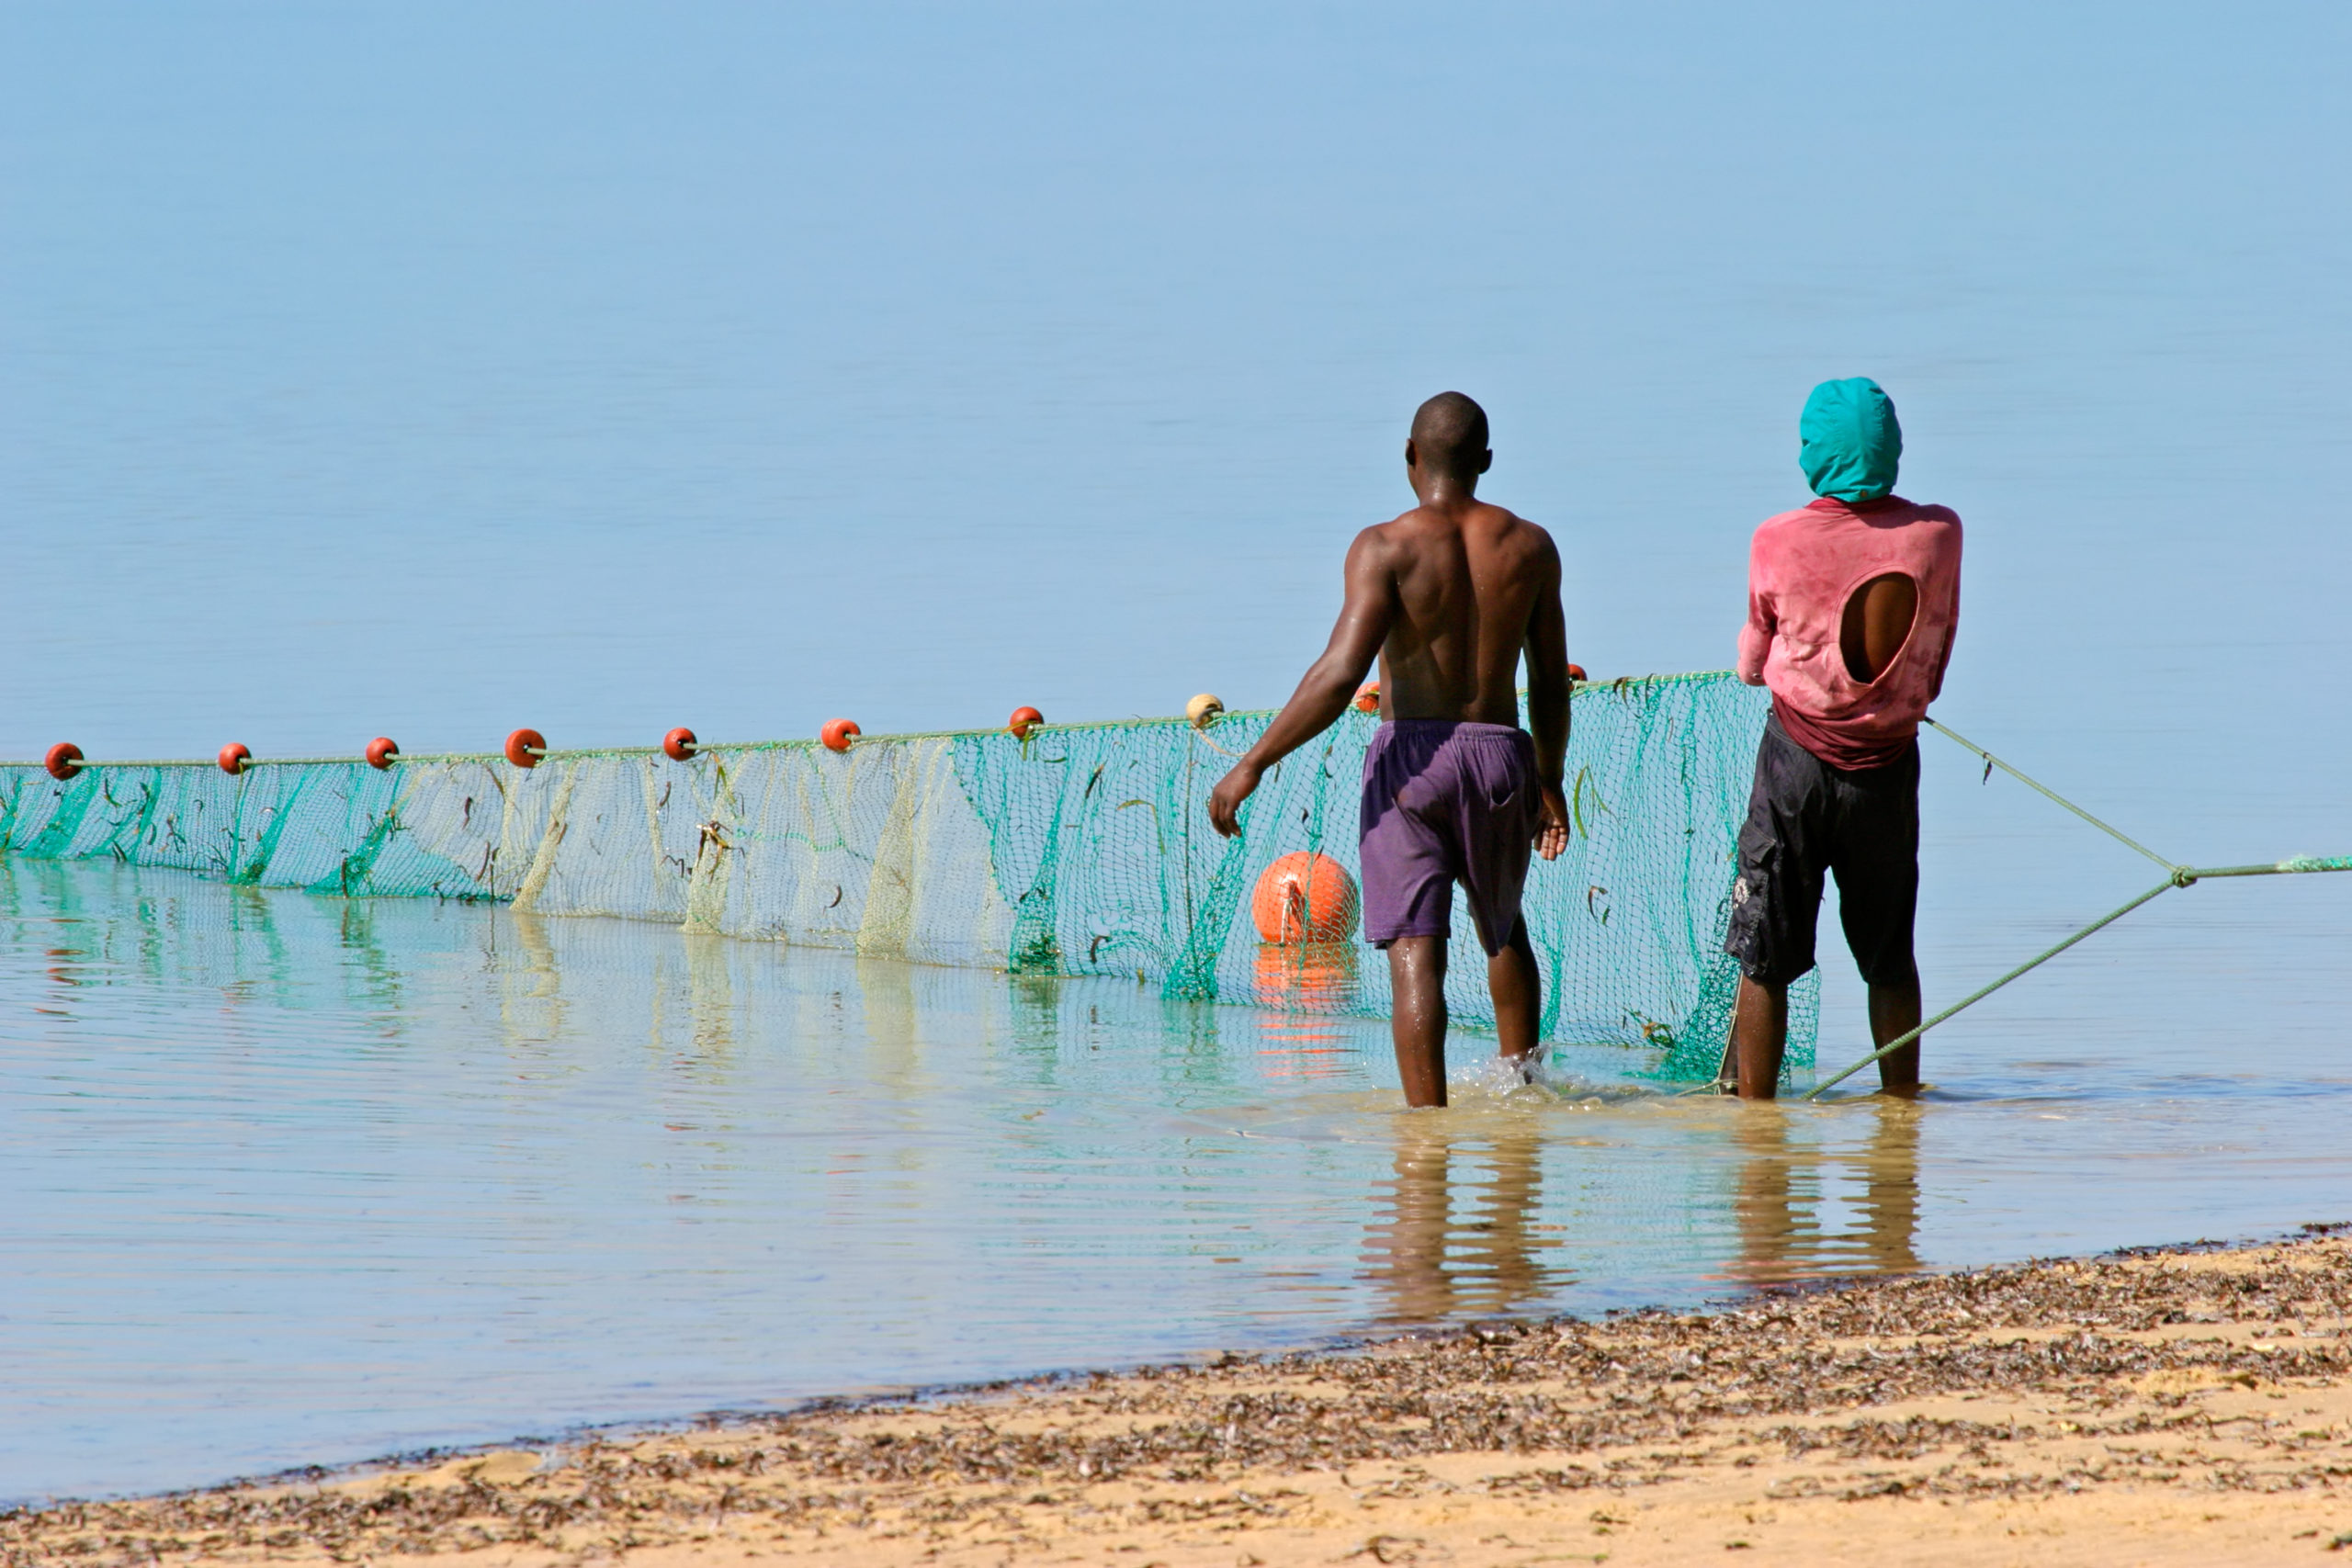 Meet Mozambique locals like these fishermen when you take a tailor-made holiday with Alfred&.